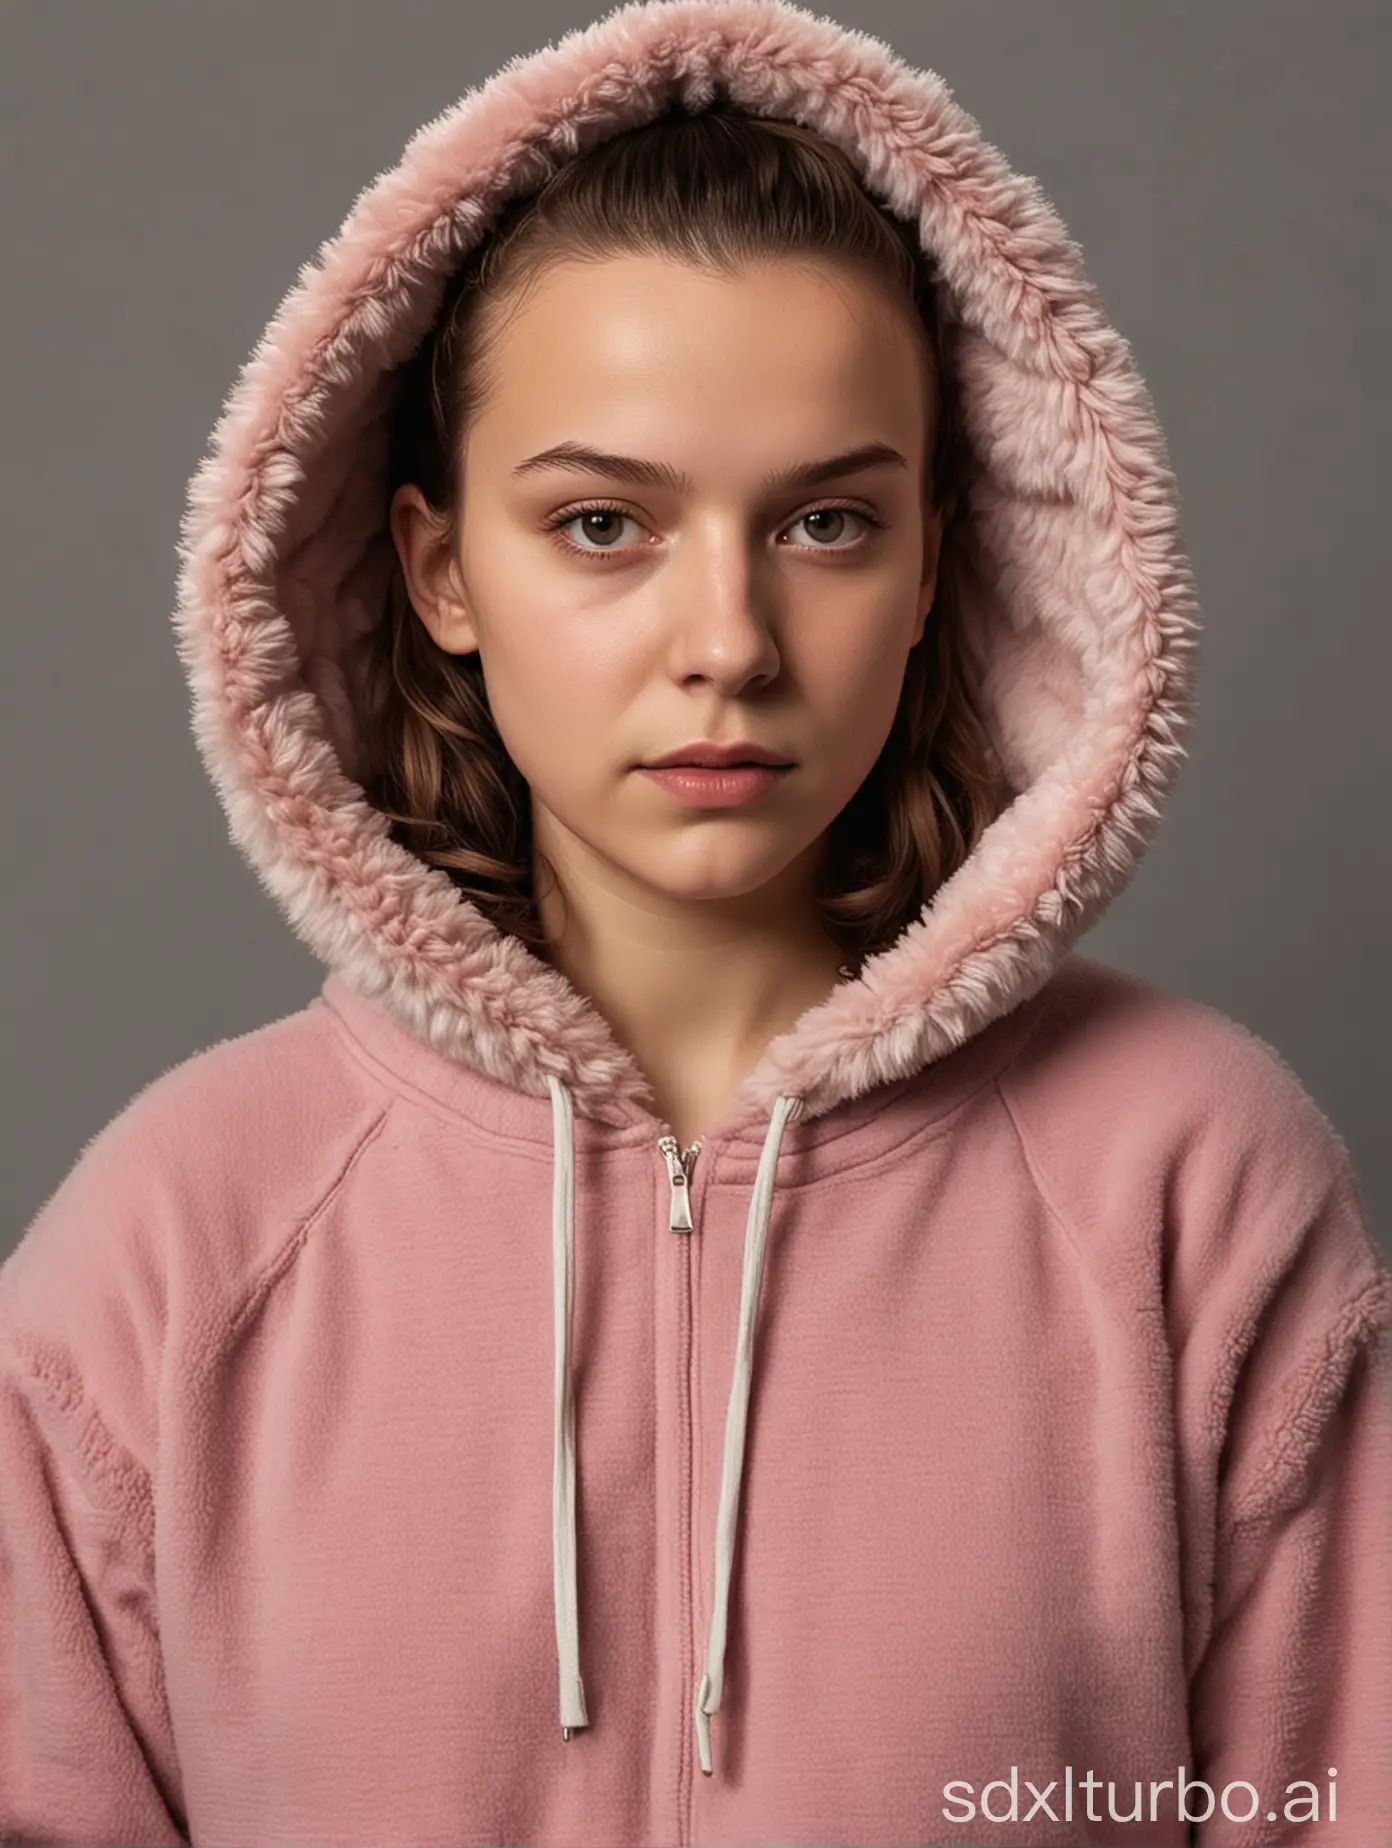 Mysterious-Figure-in-ElevenInspired-FurTrimmed-Hoodie-from-Stranger-Things